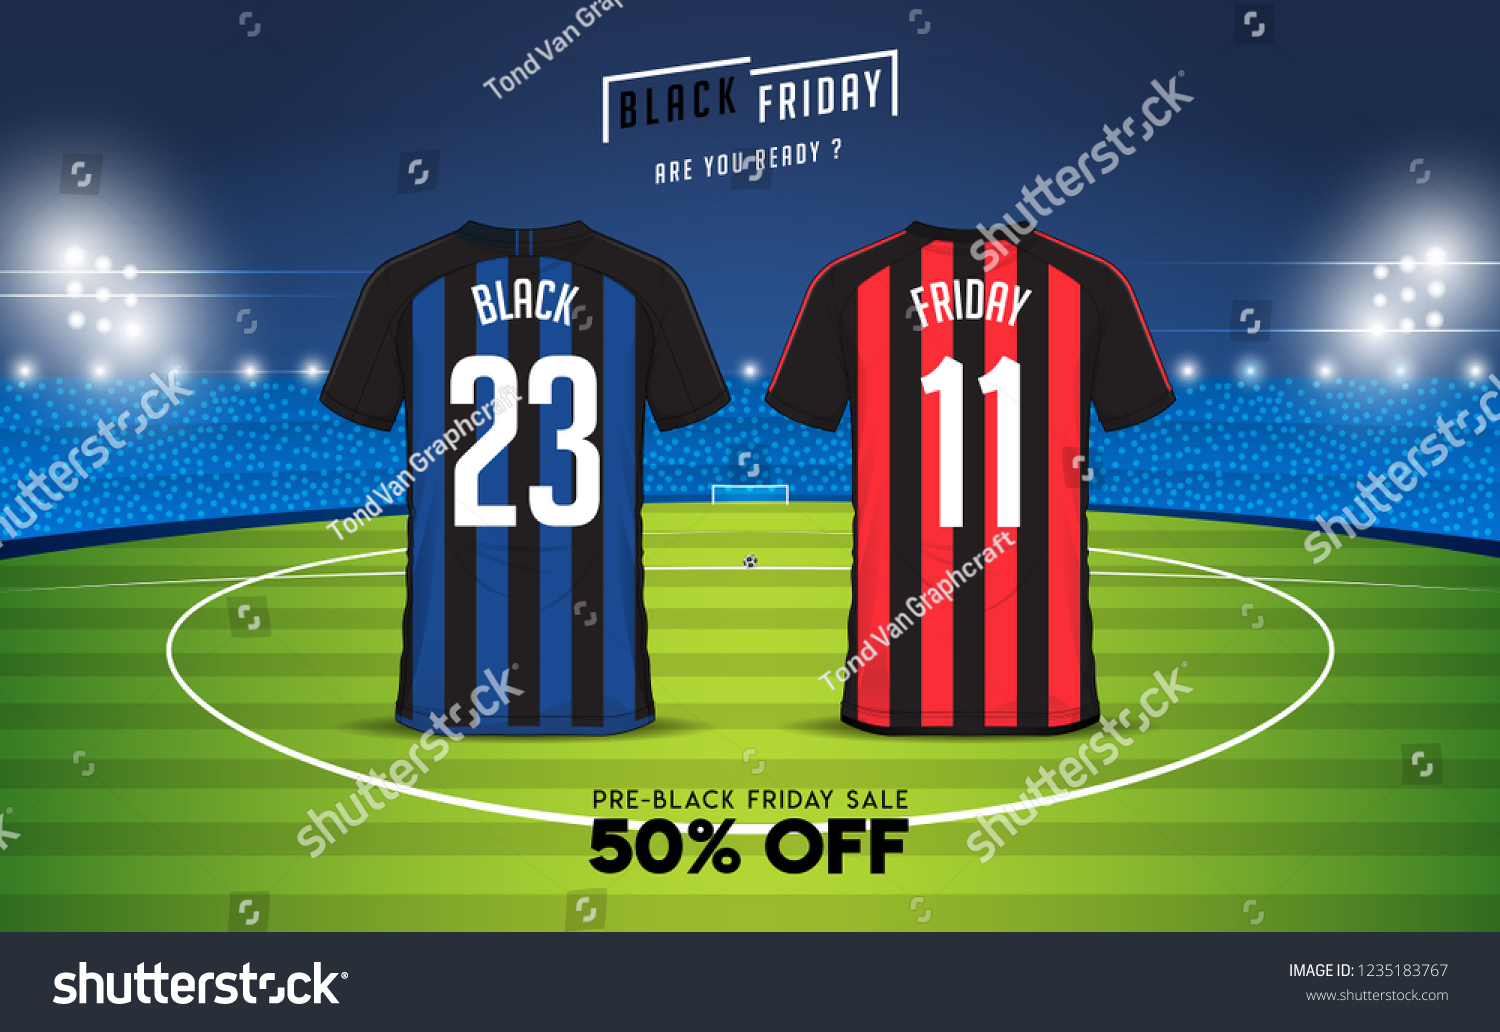 Black Friday Sale Banner Template 